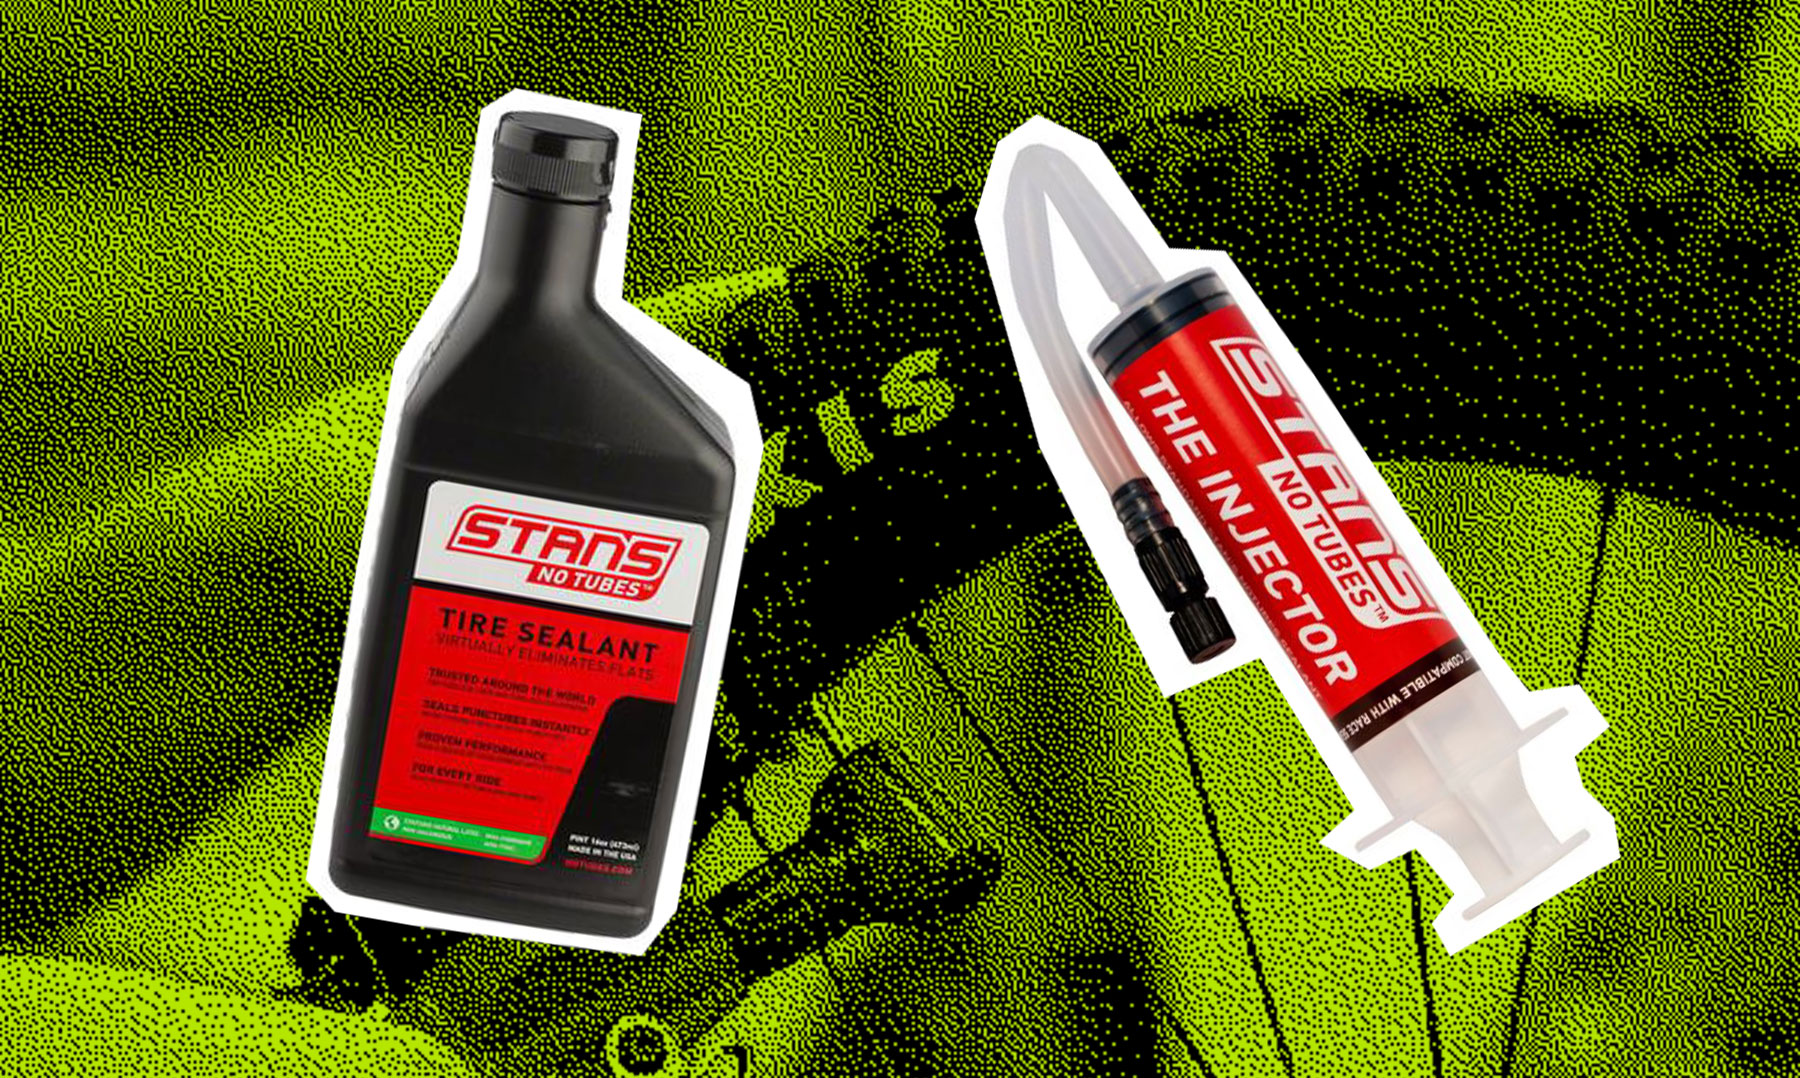 Stan's NoTubes tubeless tire sealant injector